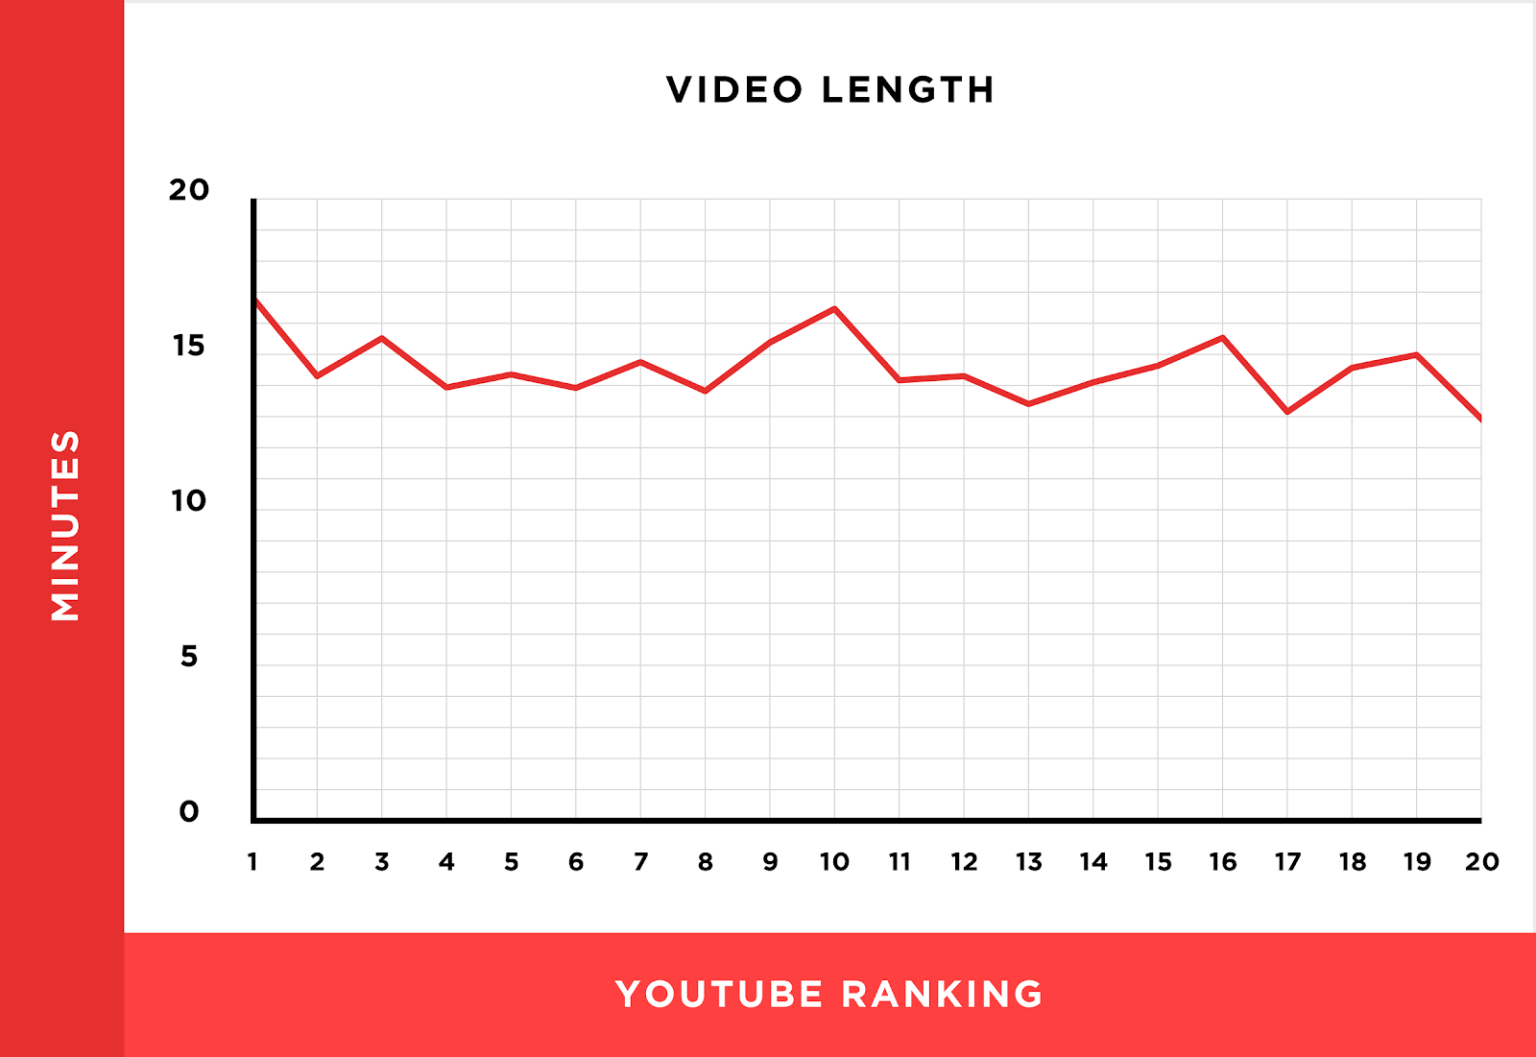 Line graph showing the relationship between video length and YouTube rank